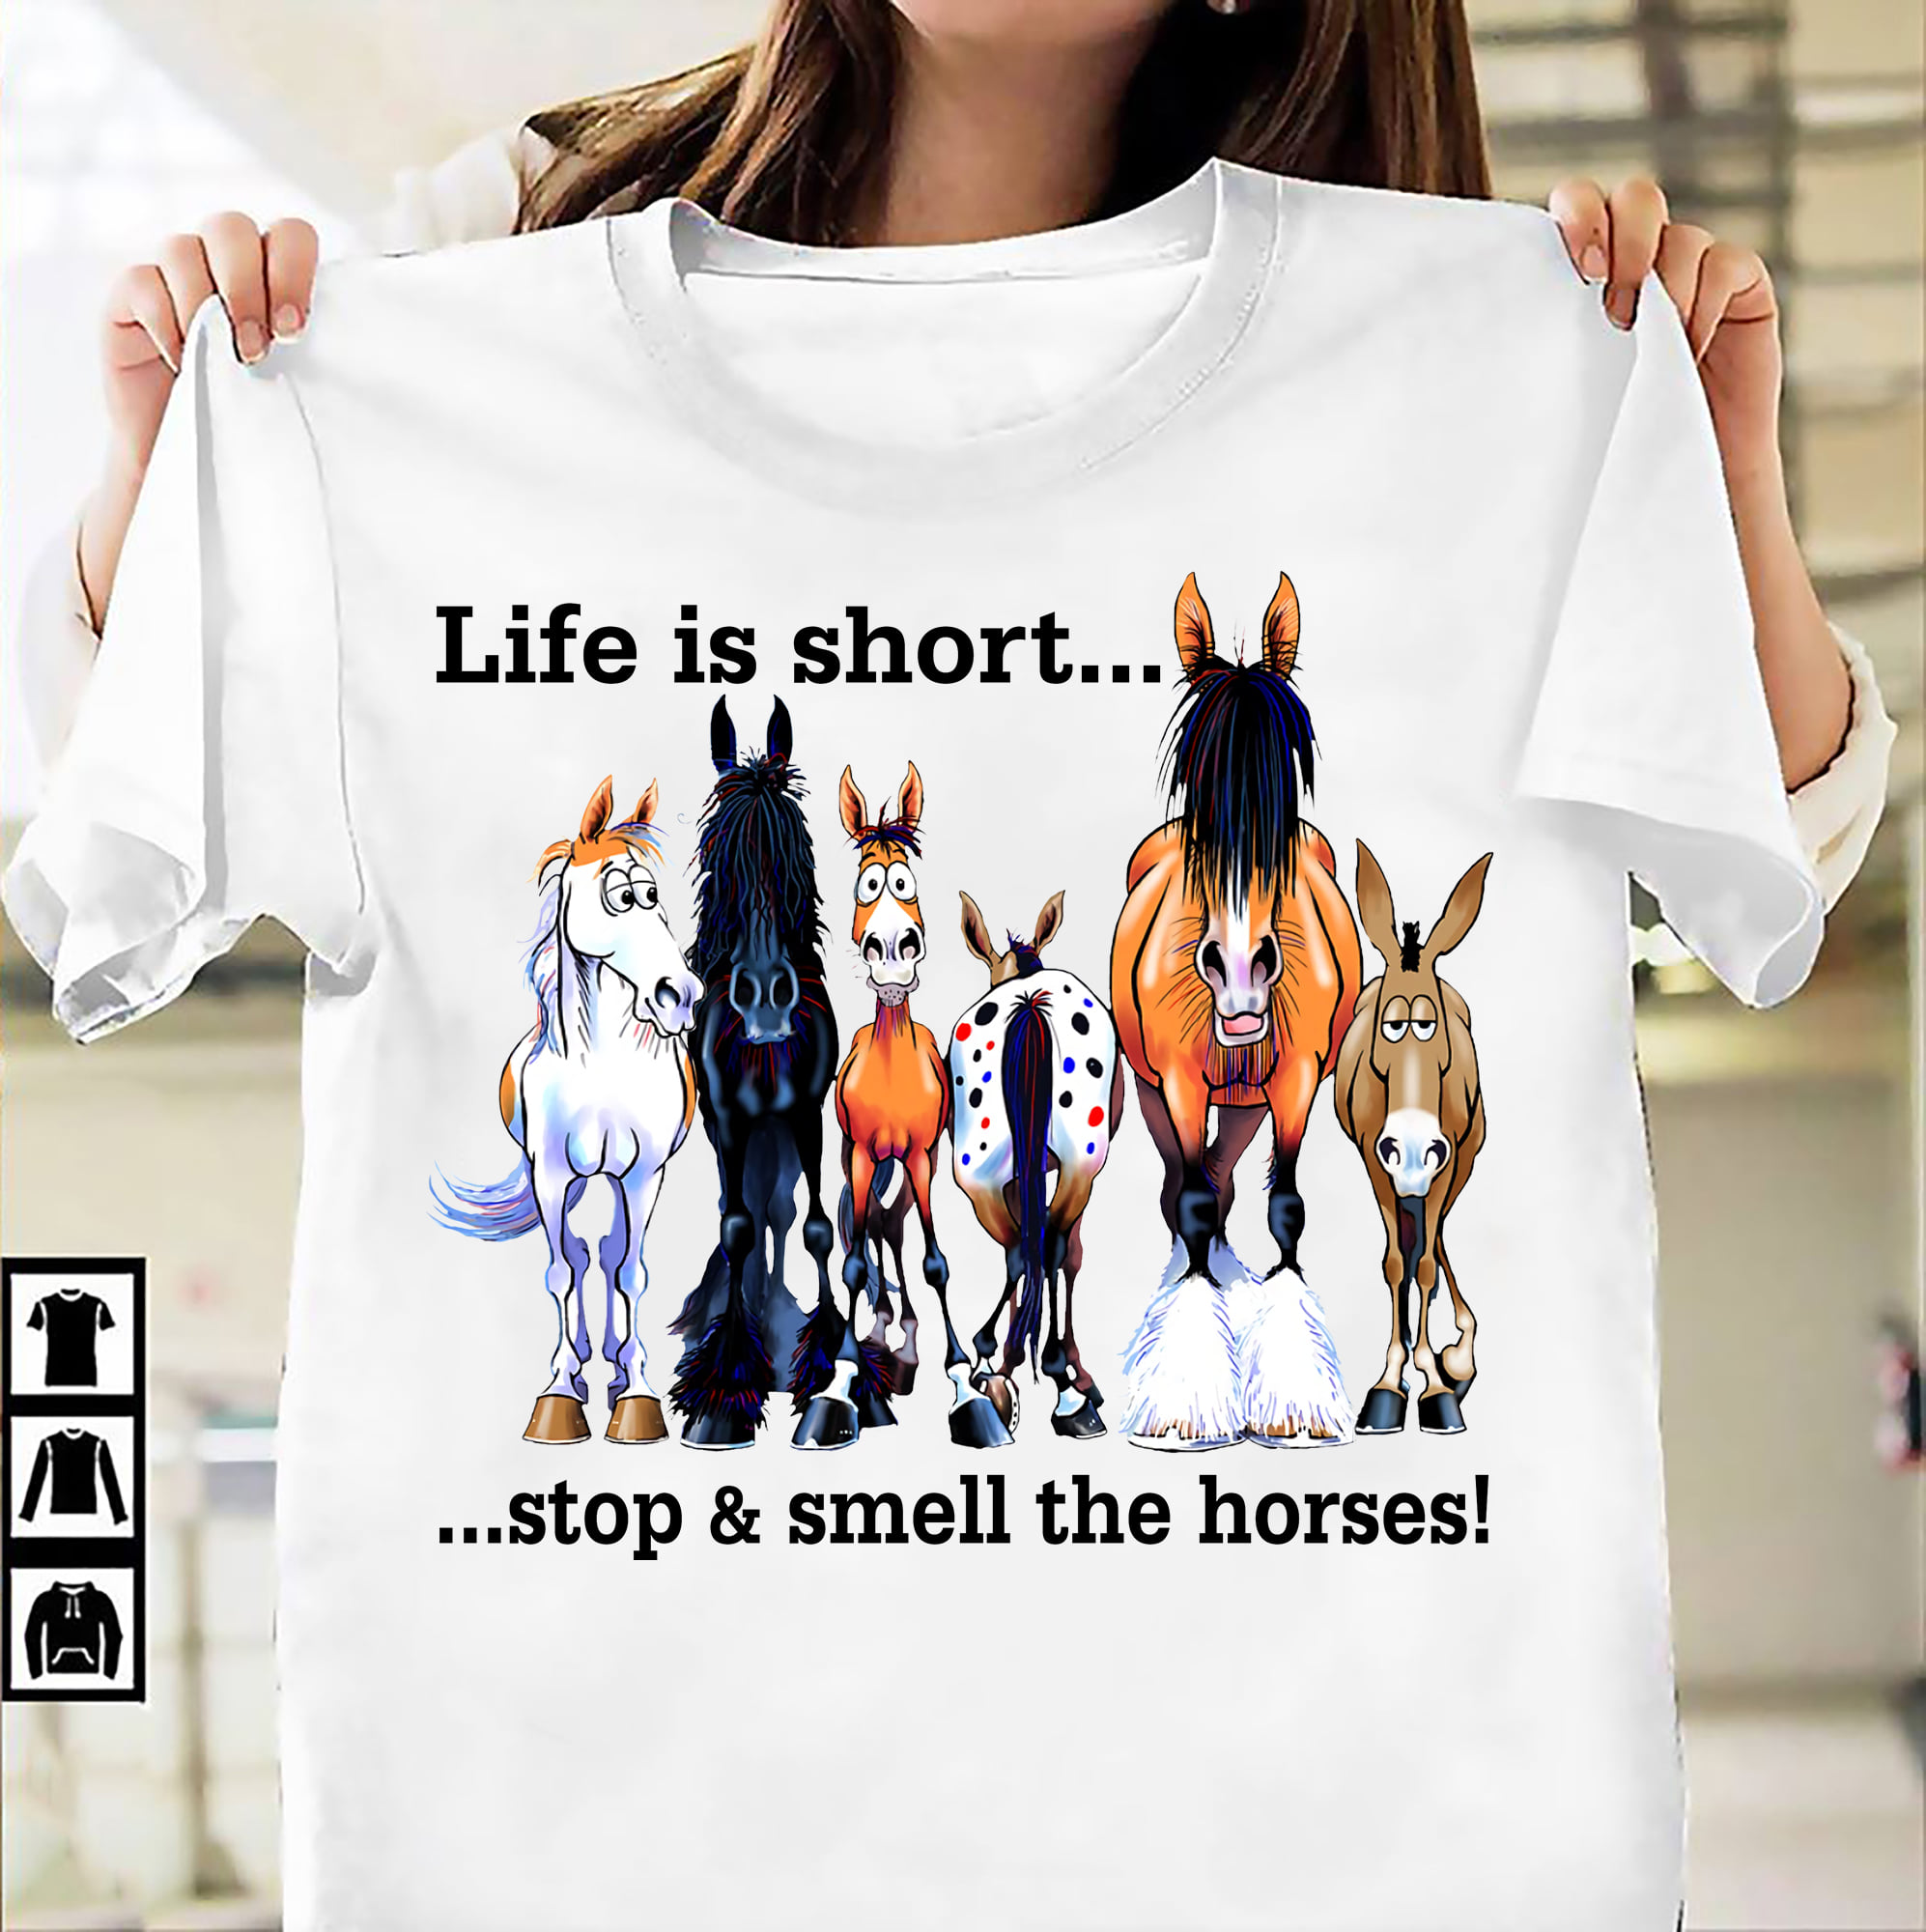 Life is short... stop and smell the horses!